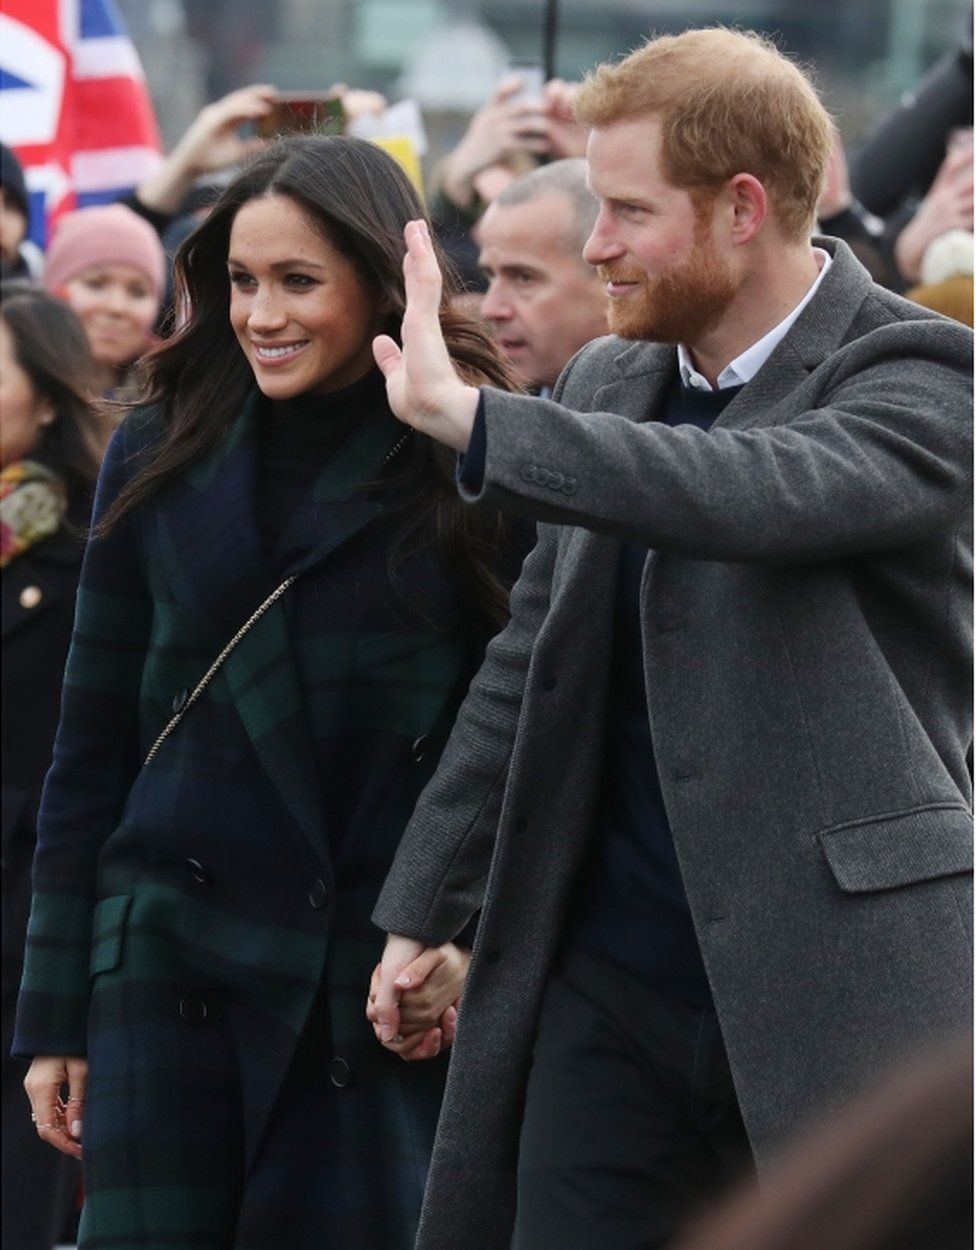 Prince Harry and Meghan Markle during a walkabout on the esplanade at Edinburgh Castle, during their visit to Scotland.